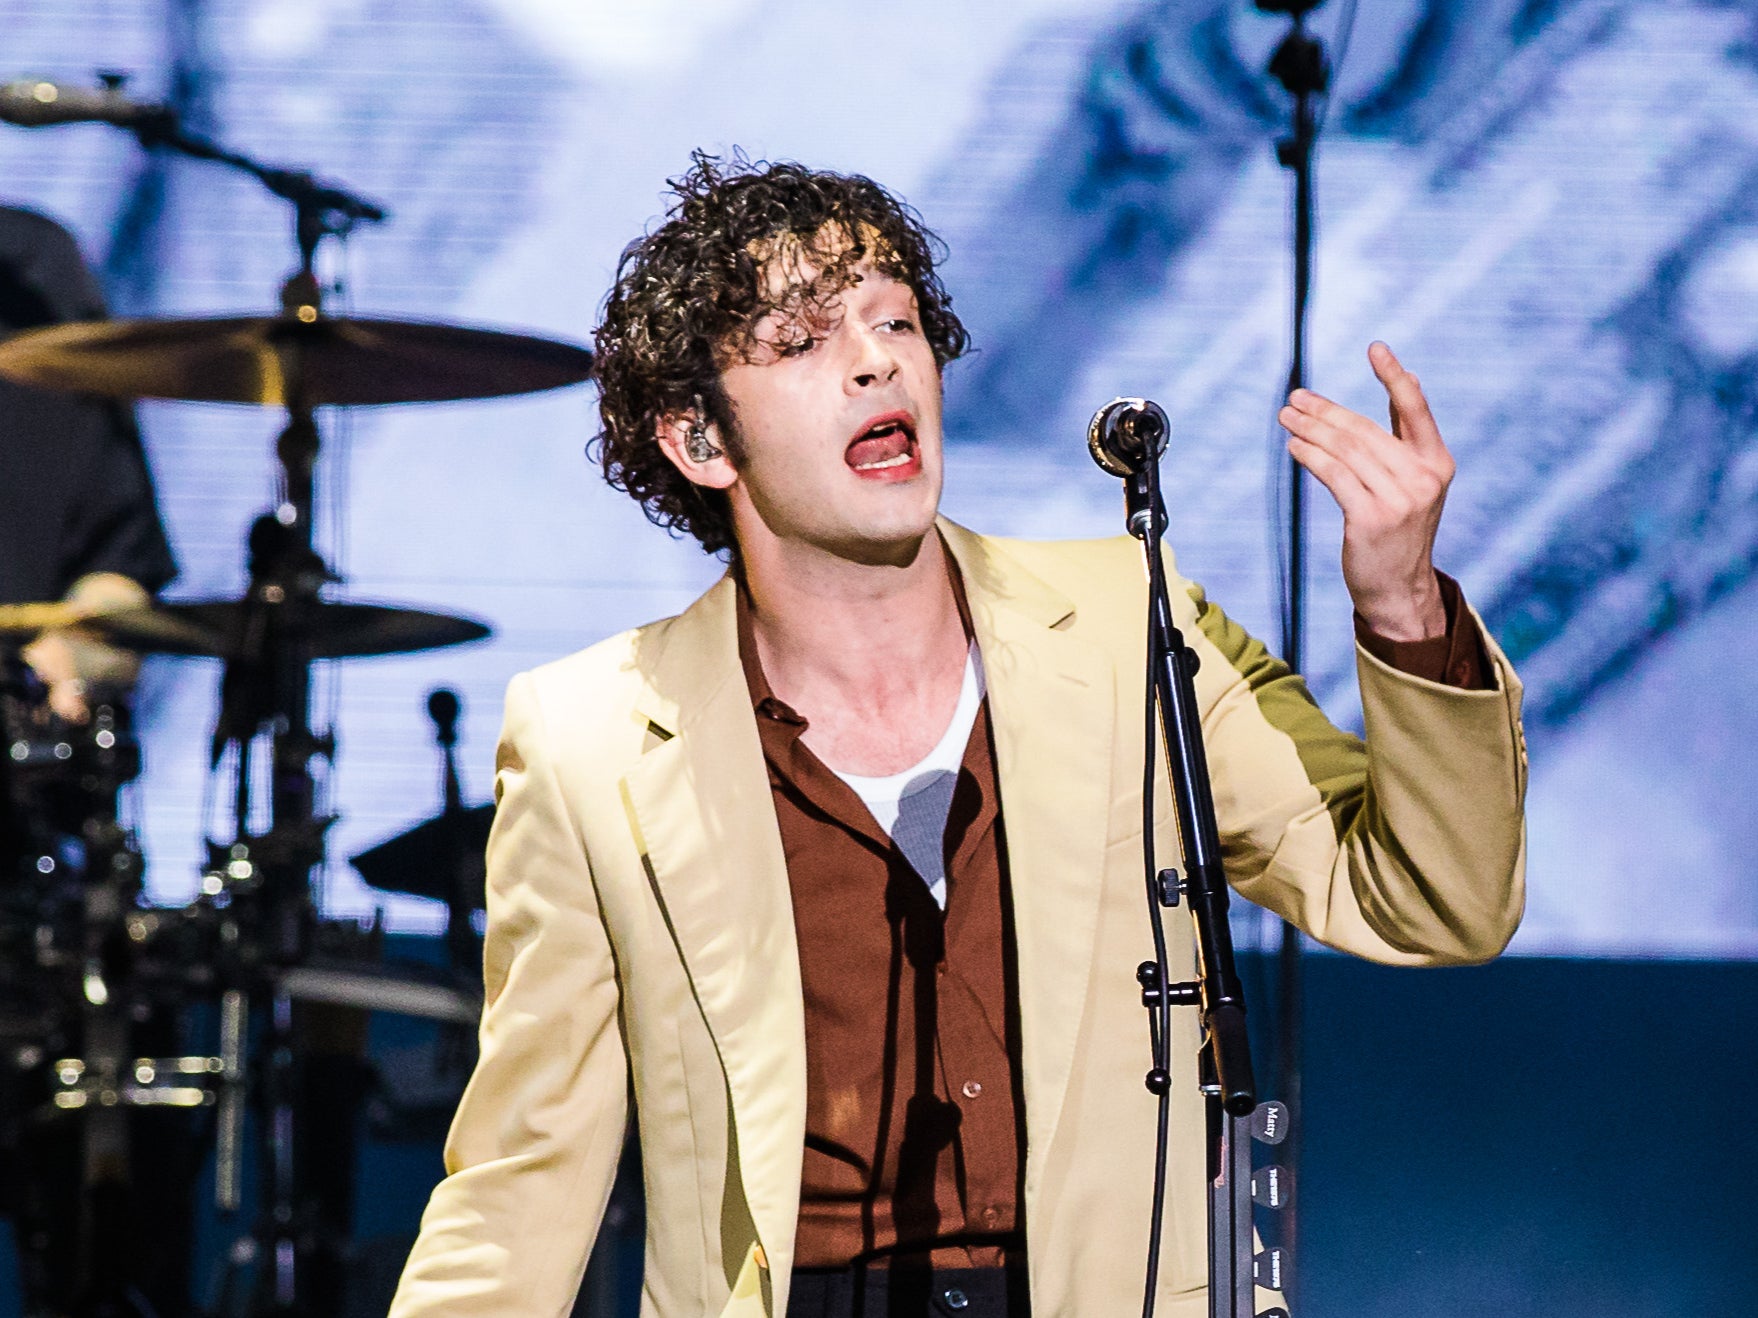 Matty Healy of The 1975 sparked uproar after kissing his bandmate onstage at a festival in Malaysia (Photo by Mauricio Santana/Getty Images)